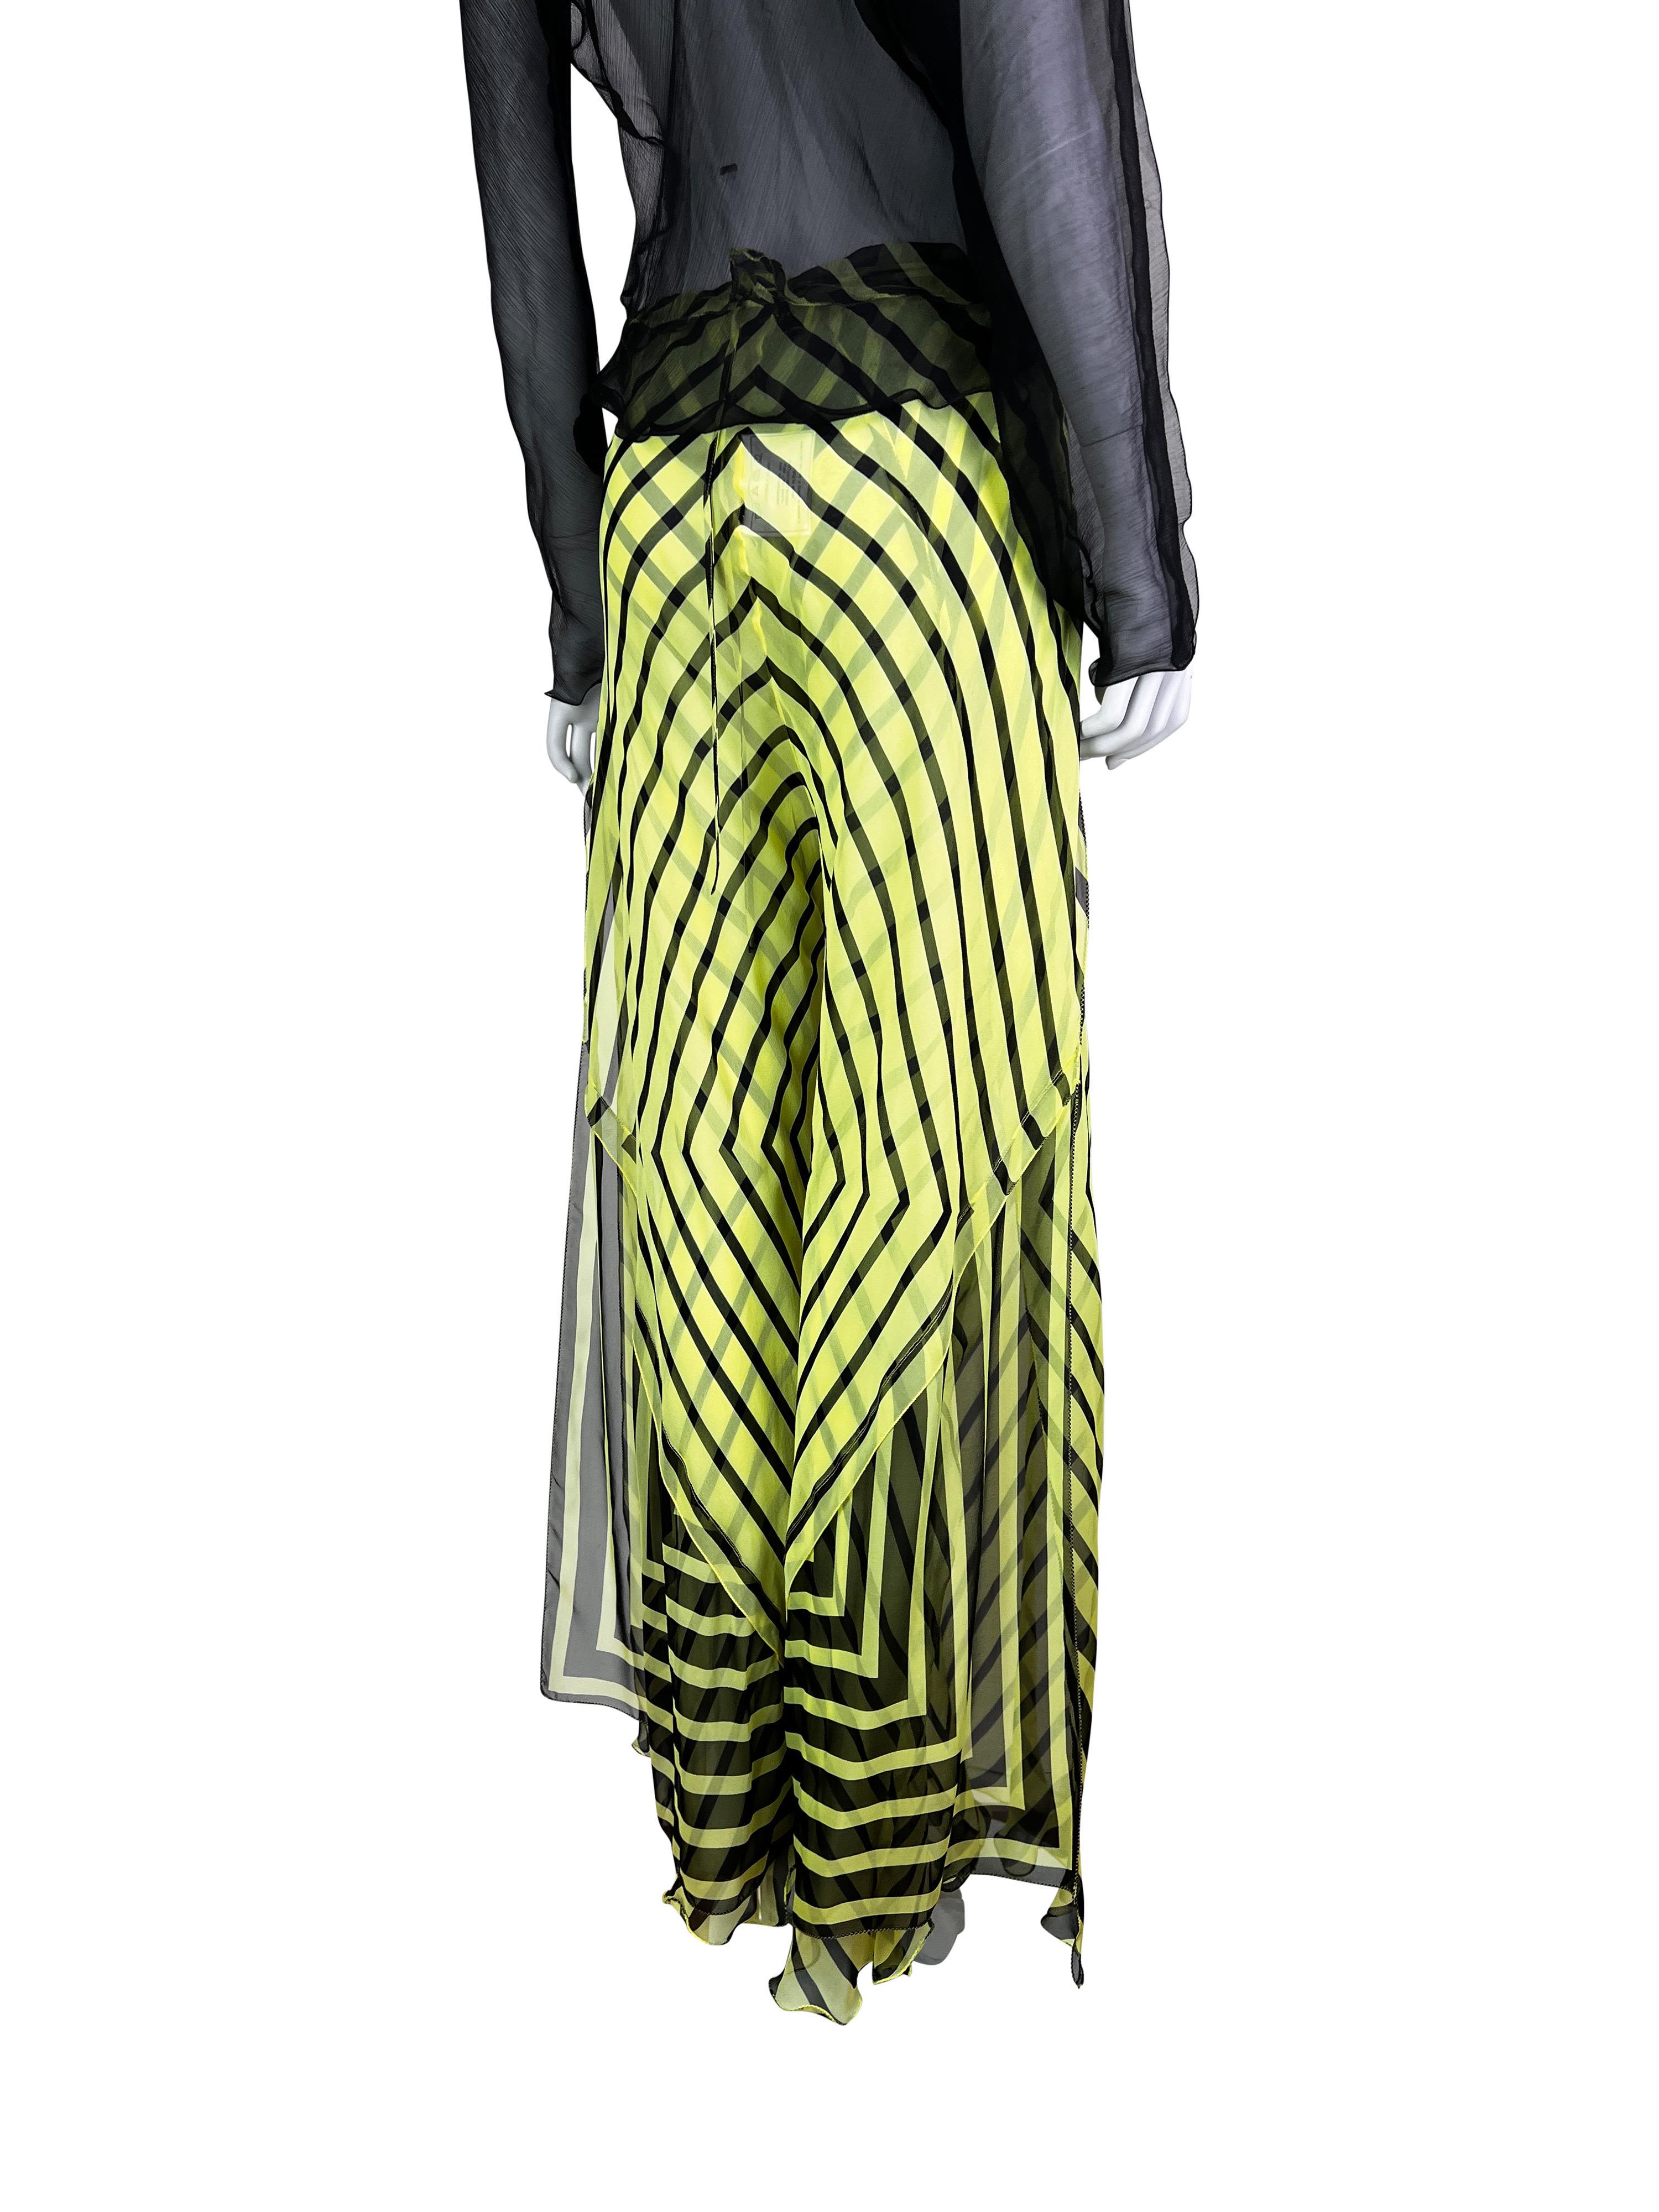 Fendi by Karl Lagerfeld Spring 2000 Doubled Layered Graphic Lime Bias-Cut Silk T For Sale 5